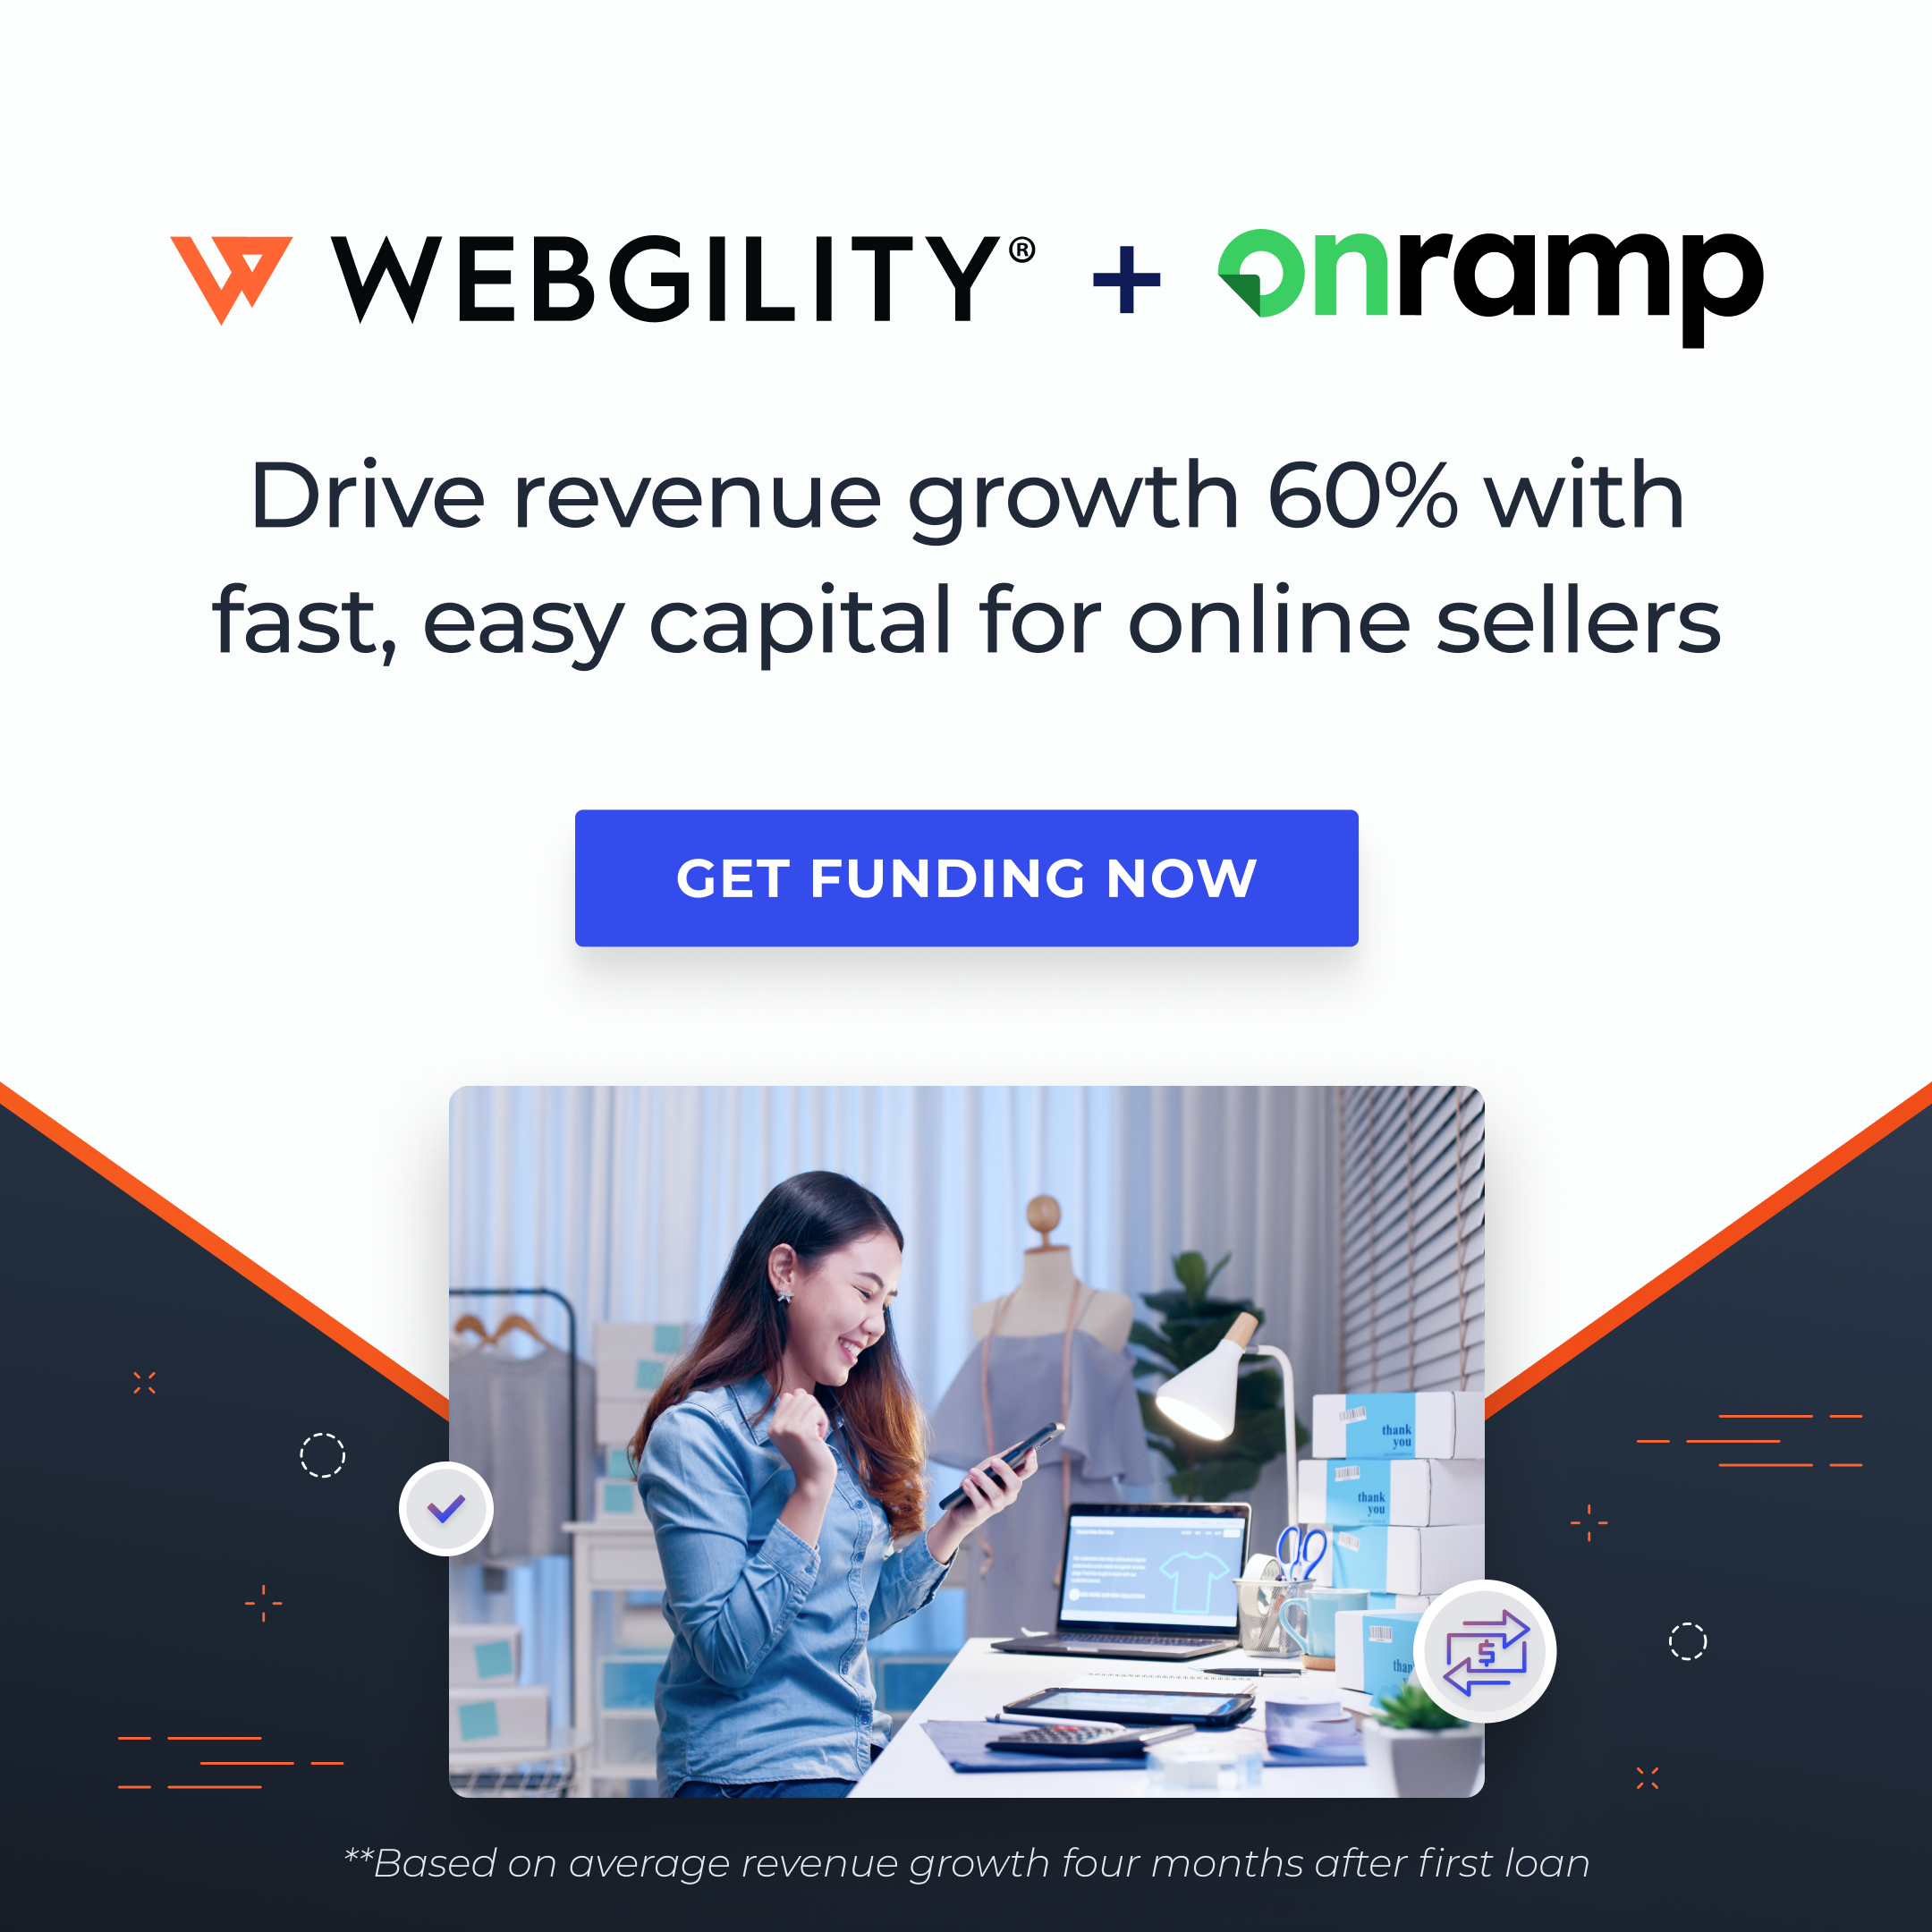 Webgility and Onramp connect online sellers to flexible financing